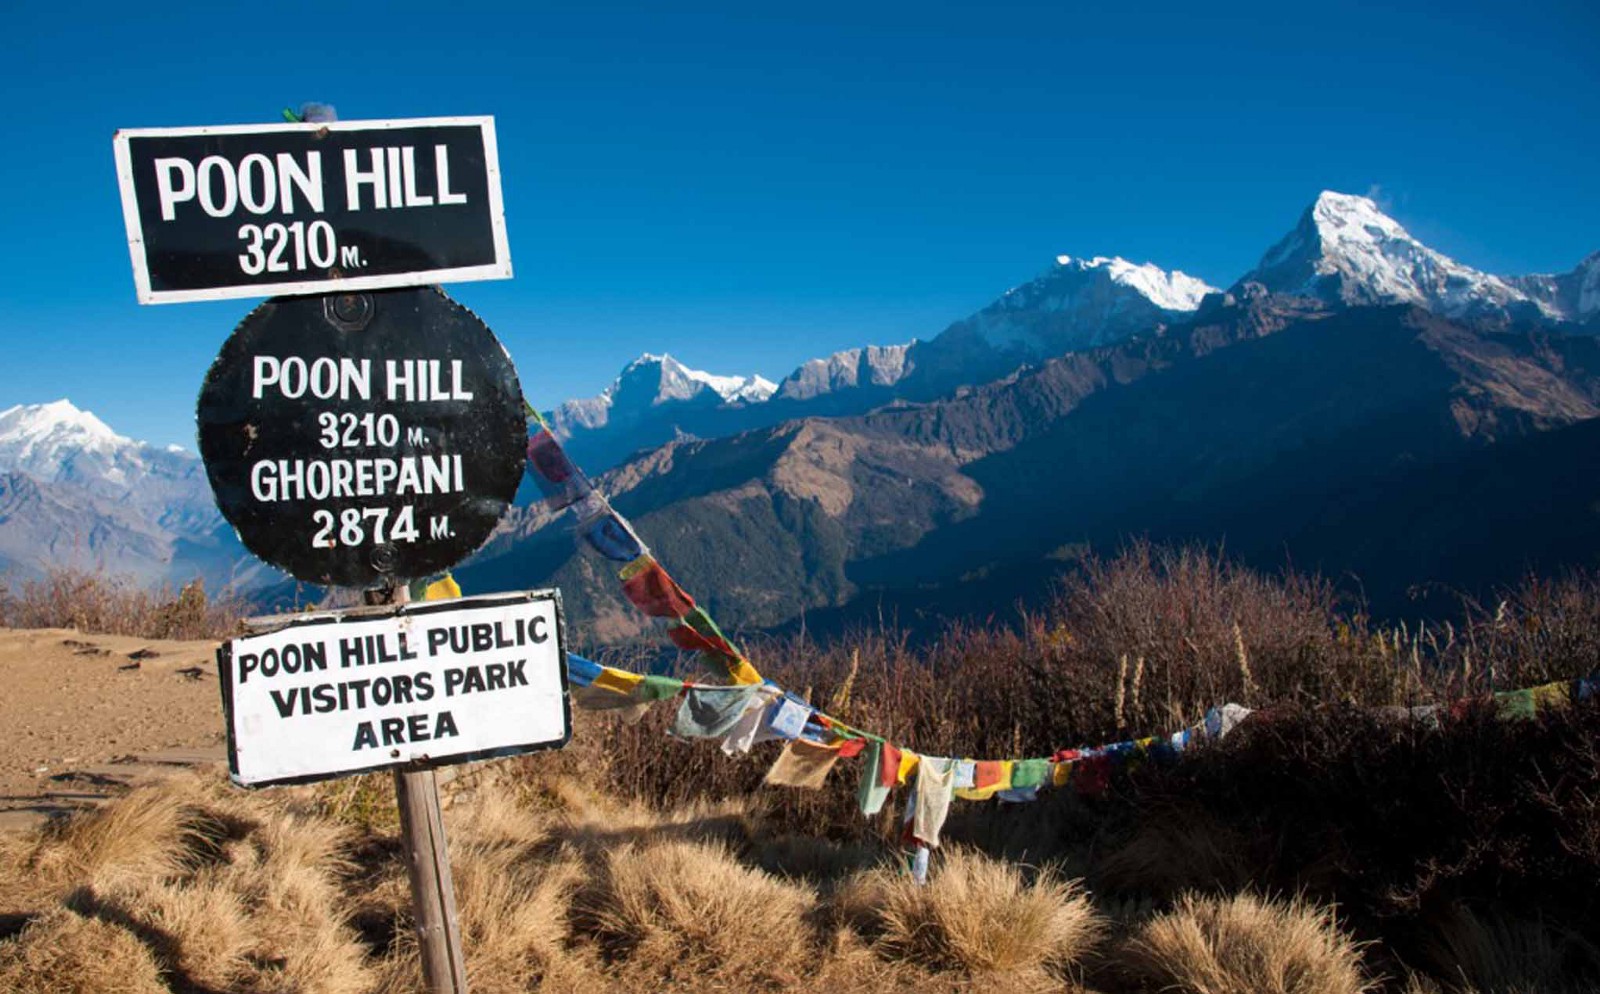 A Complete Guide to Poon Hill Trekking in Nepal